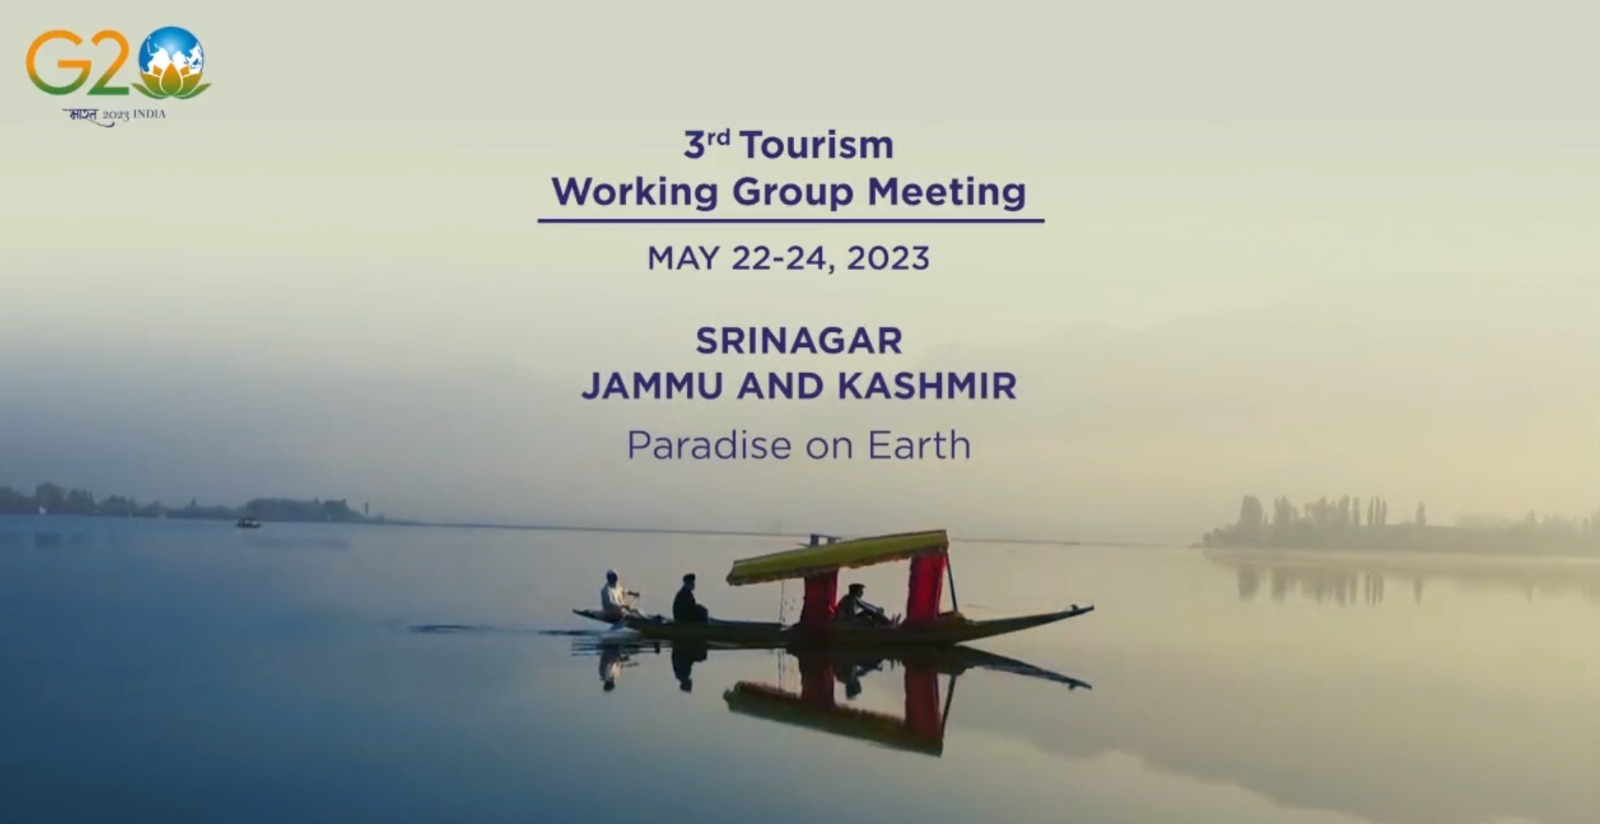 G20 Tourism Working Group: Advancing tourism with a sustainable approach